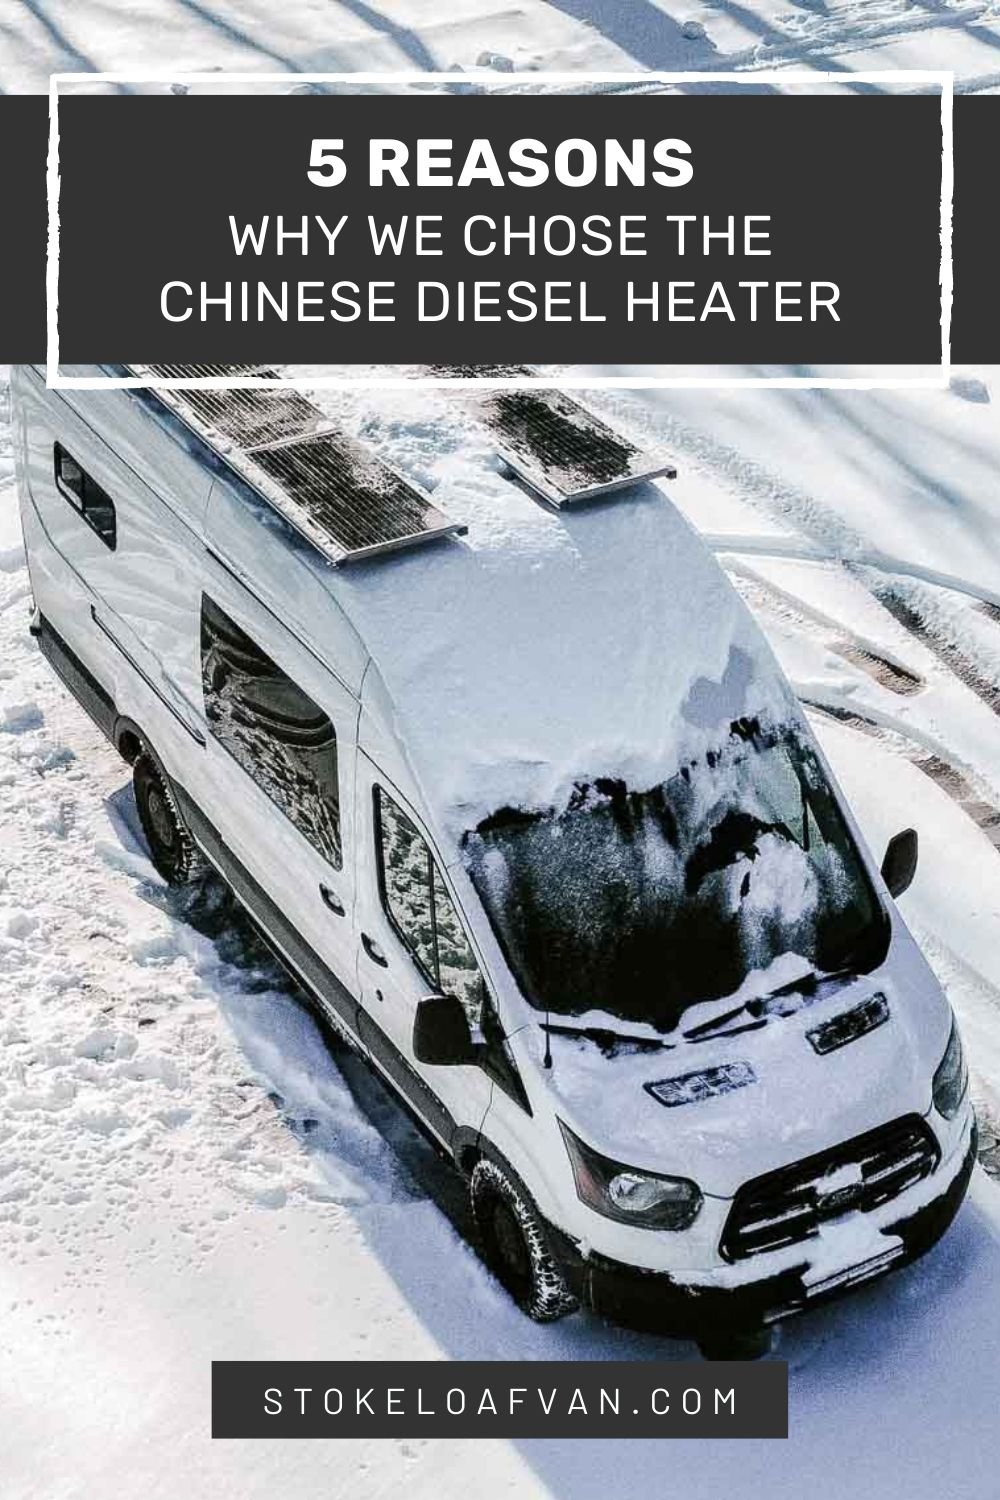 Is There a Real Alternative Car Heater?